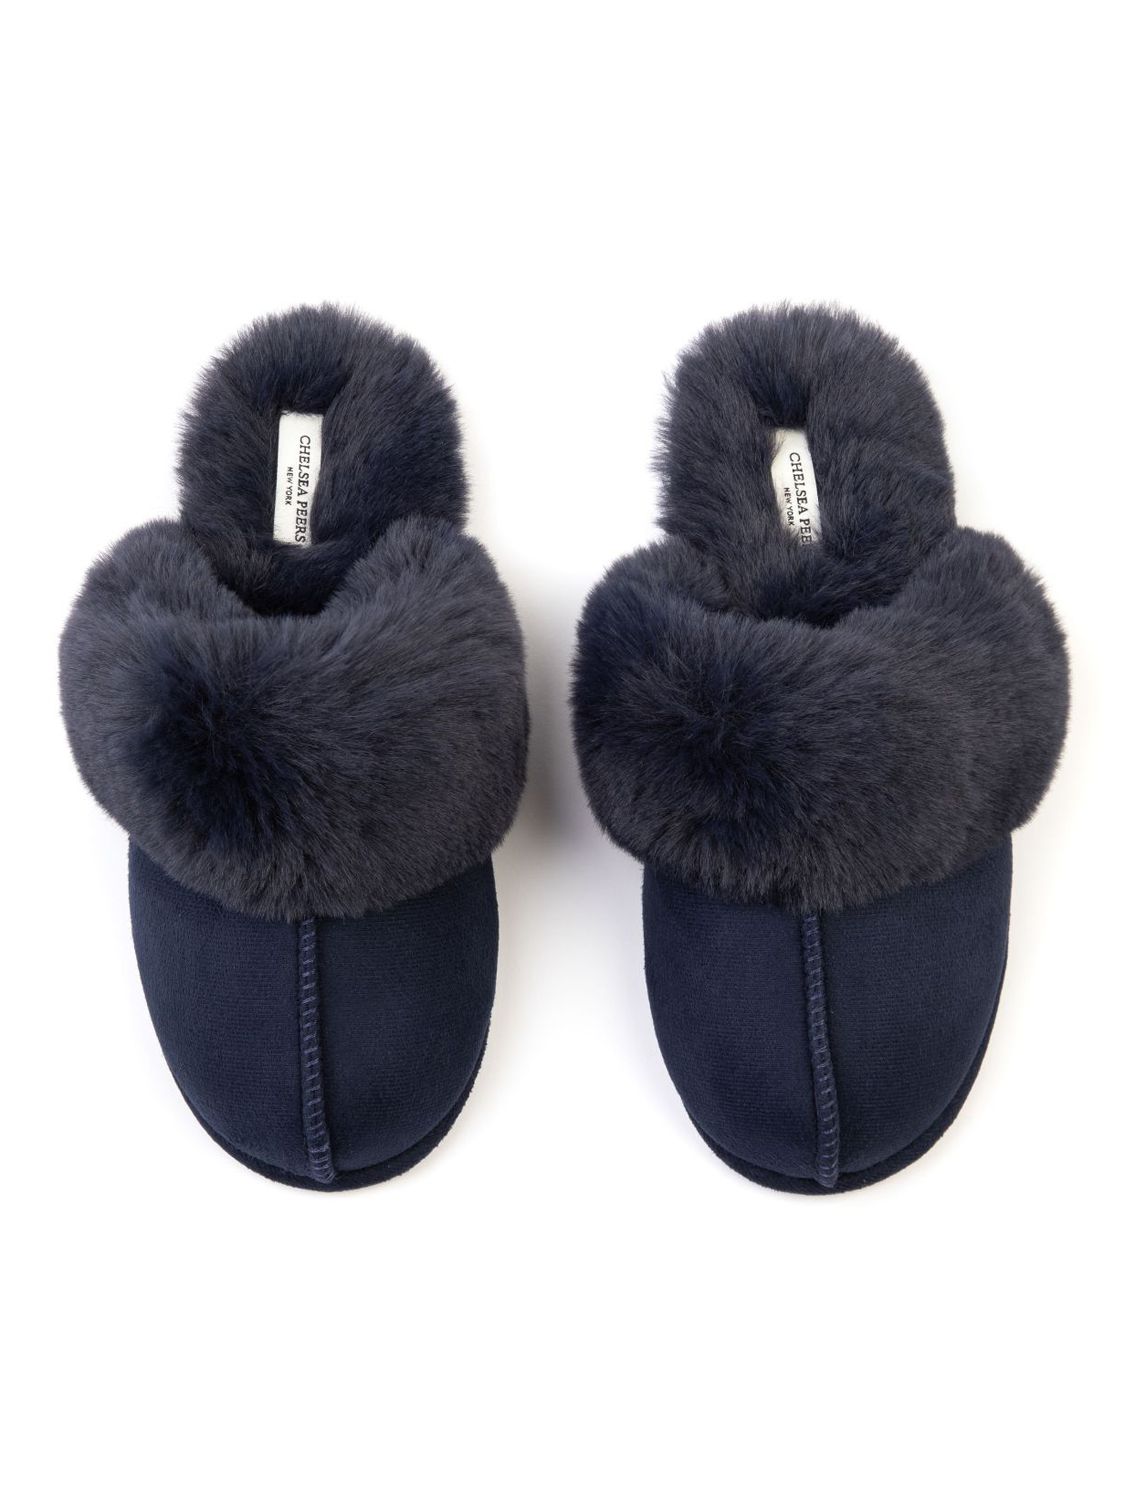 Chelsea Peers Suedette Cuffed Dome Slippers, Navy at John Lewis & Partners